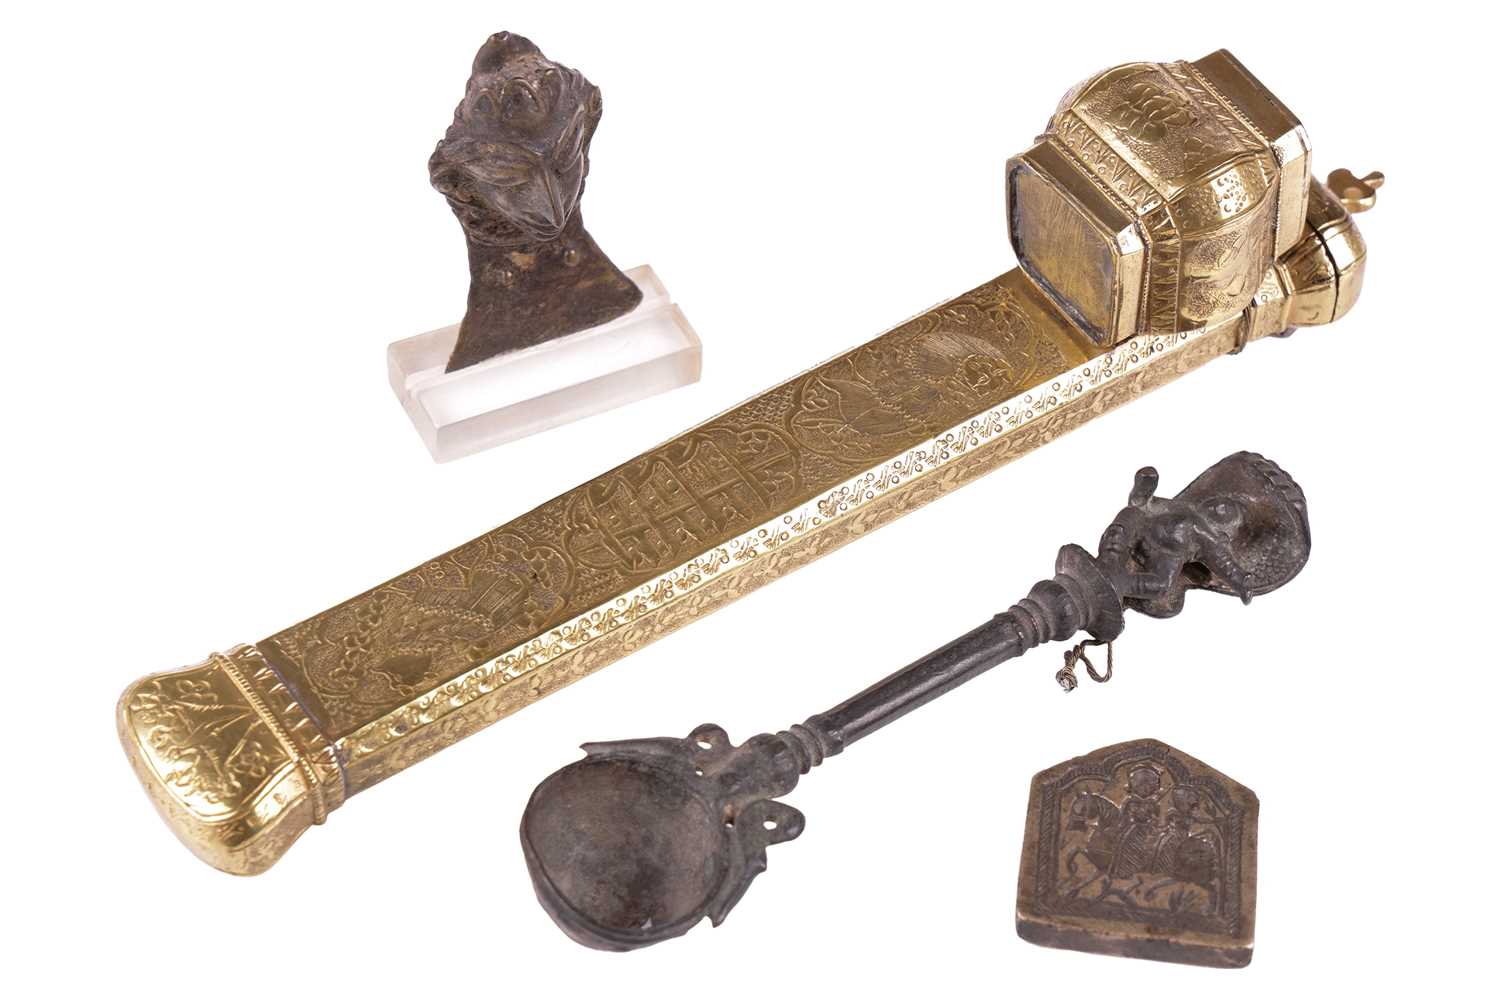 An Islamic gilt brass Qalamdan Divit scribes case, with Arabic calligraphy and decorative vignettes,